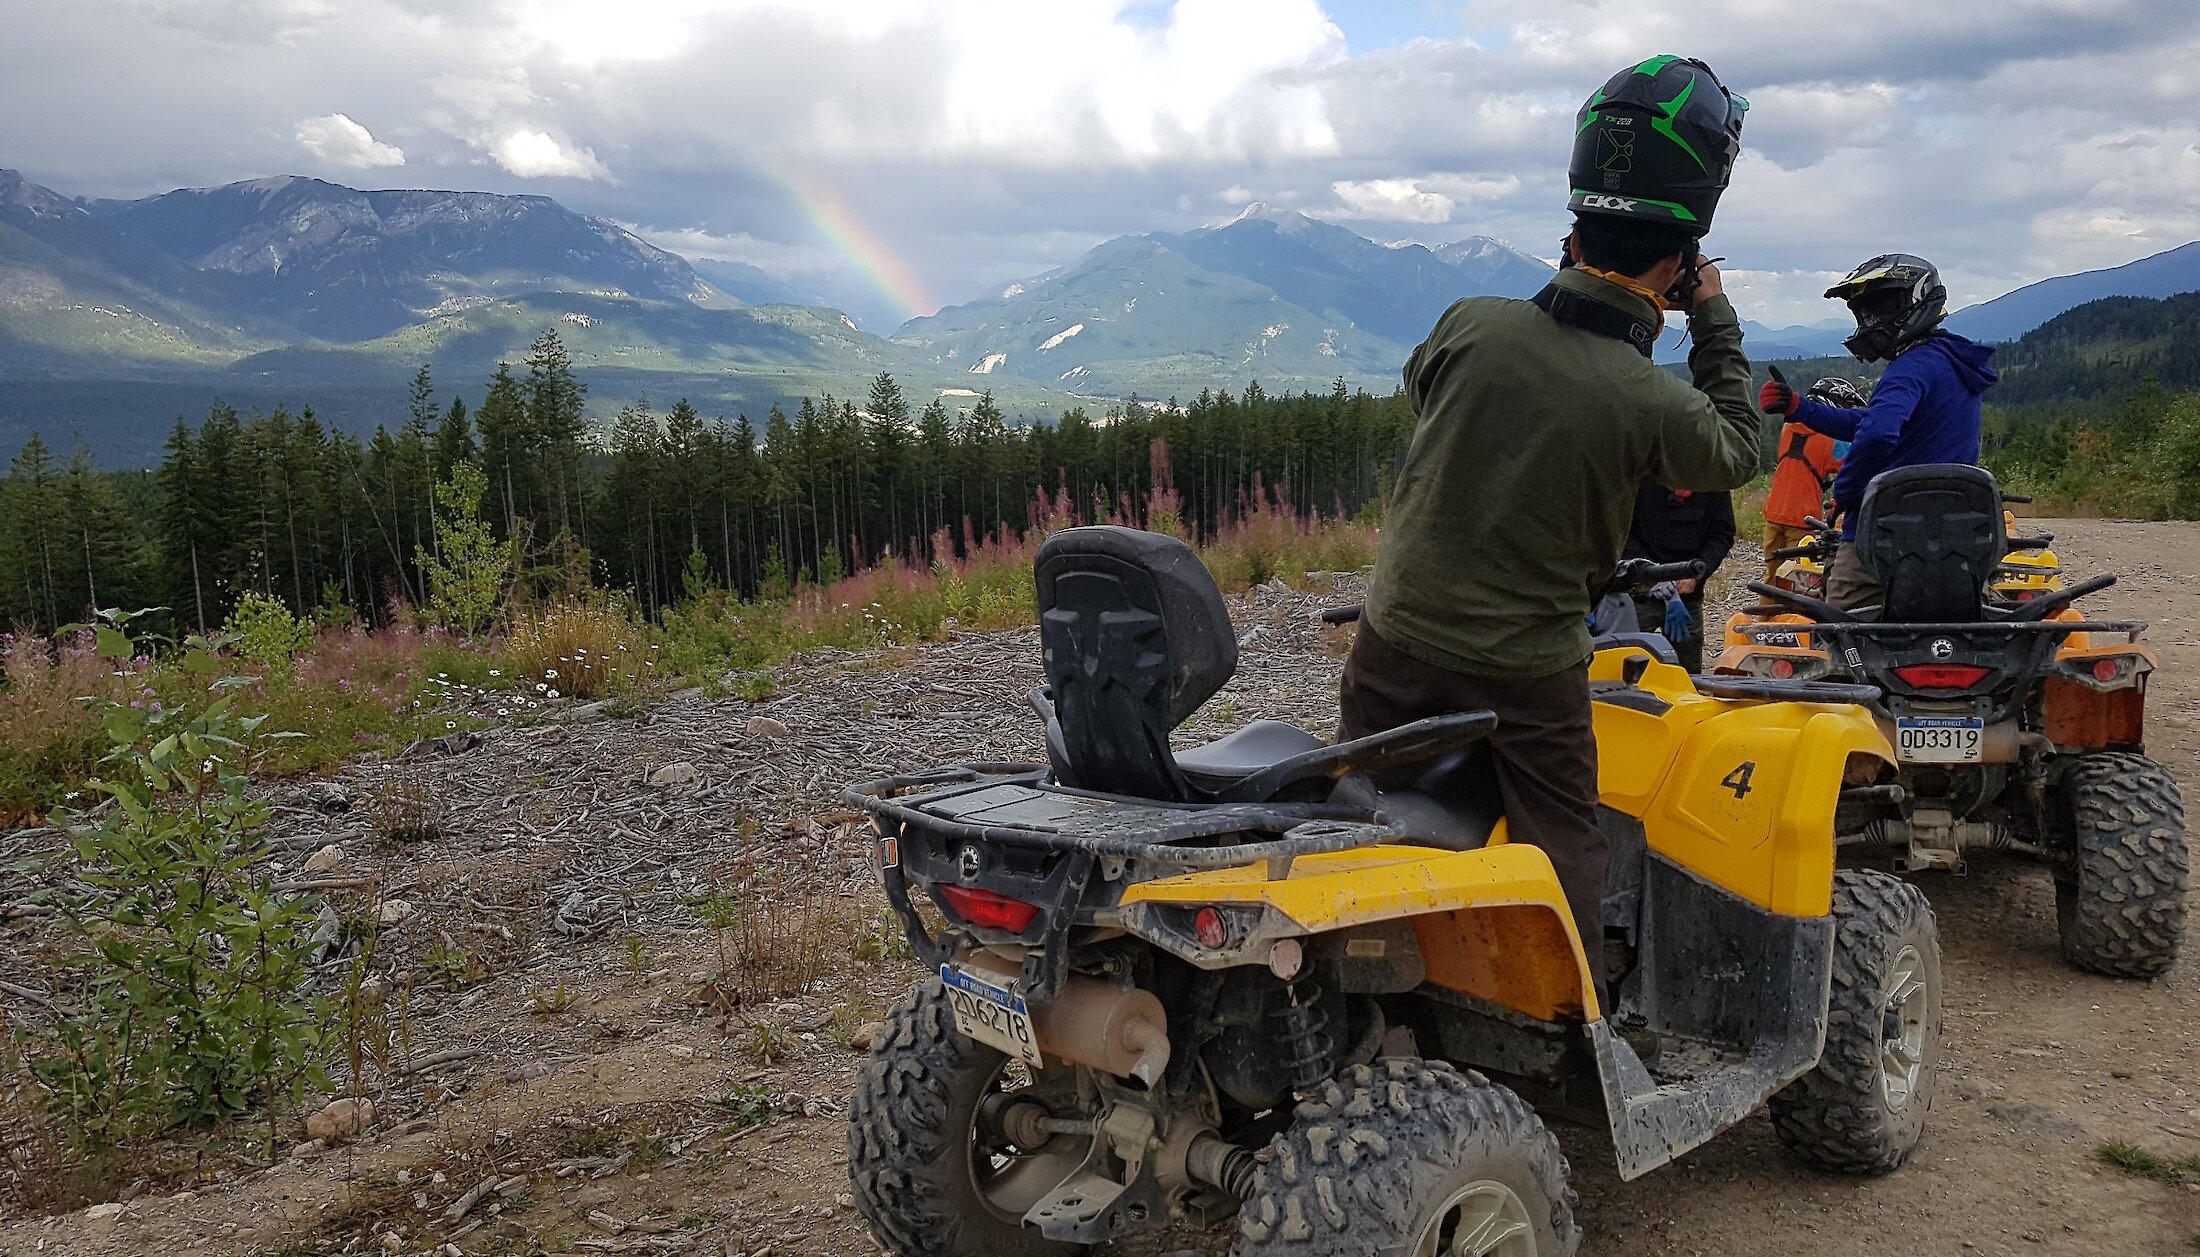 View from the offroad trail in Golden that looks over the valley and rainbow